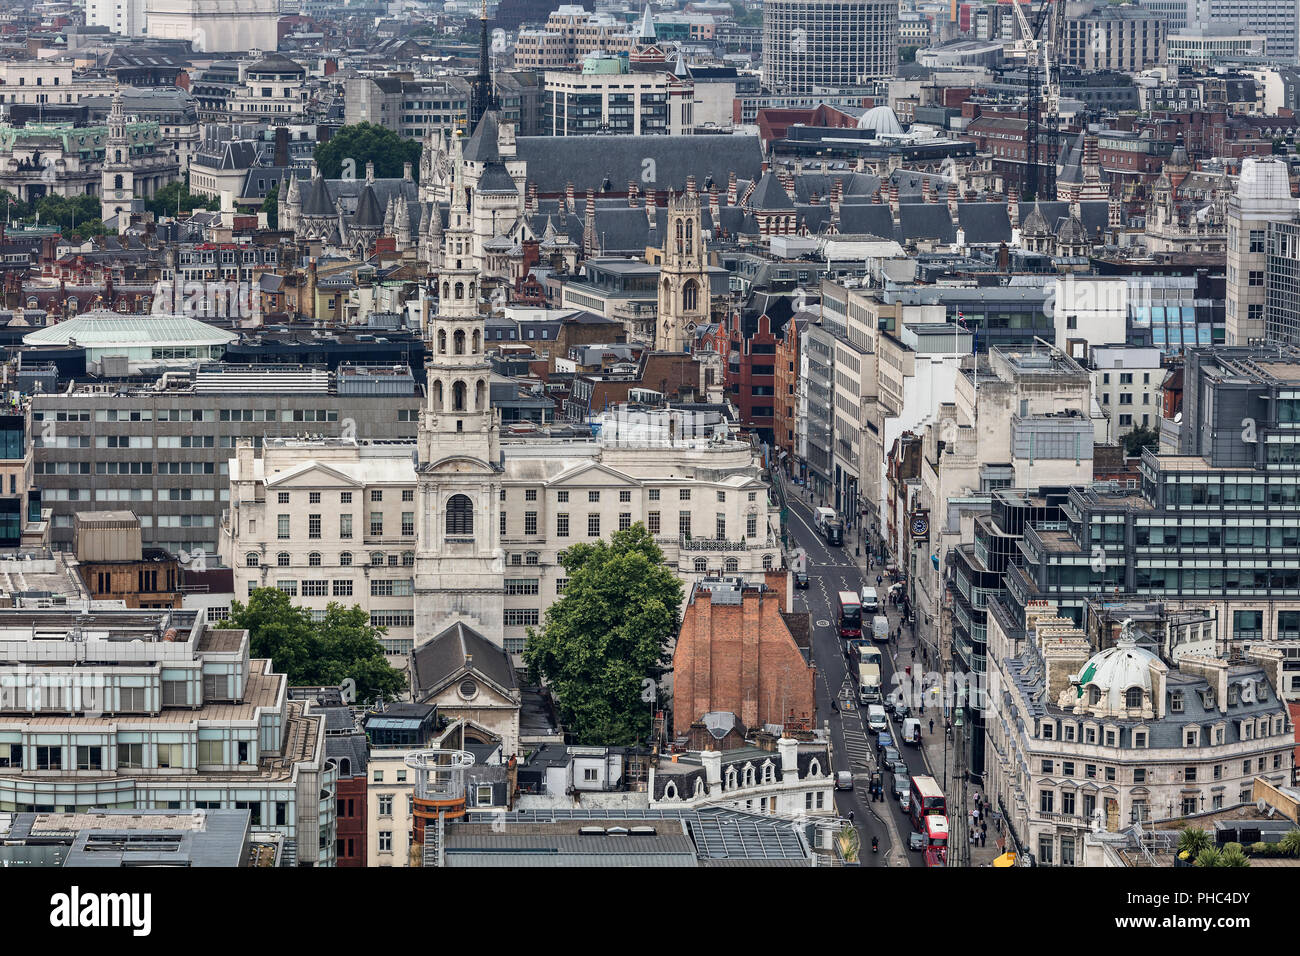 St Bride's Church, Fleet st, Cityscape from the gallery of St Paul's Cathedral, London, England, UK Stock Photo